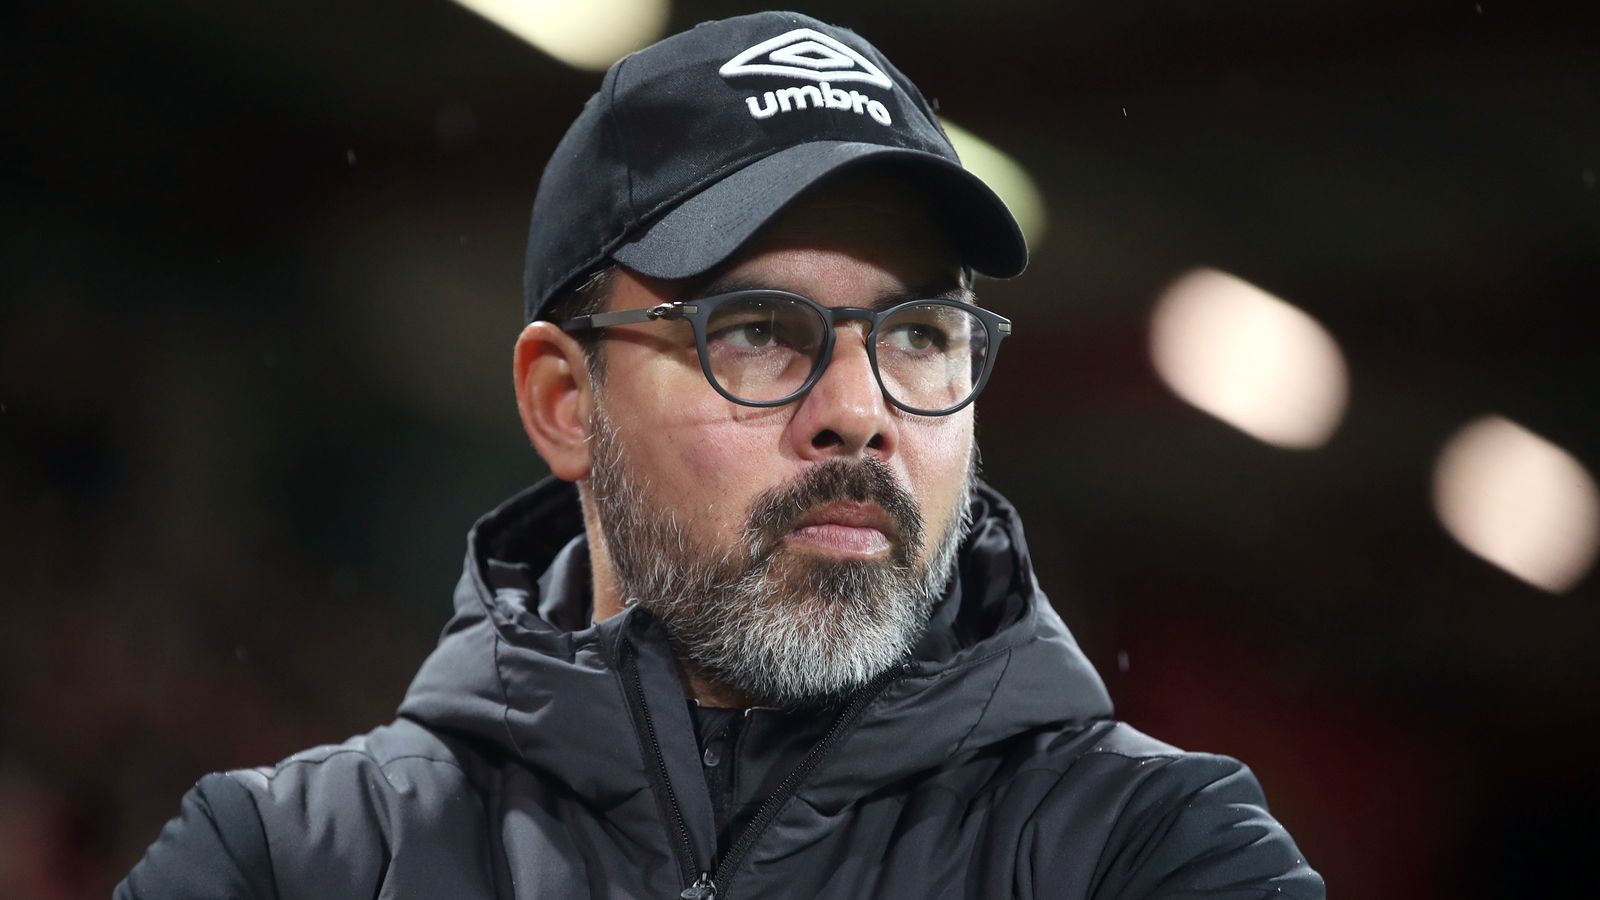 Norwich City: David Wagner appointed new head coach of Canaries